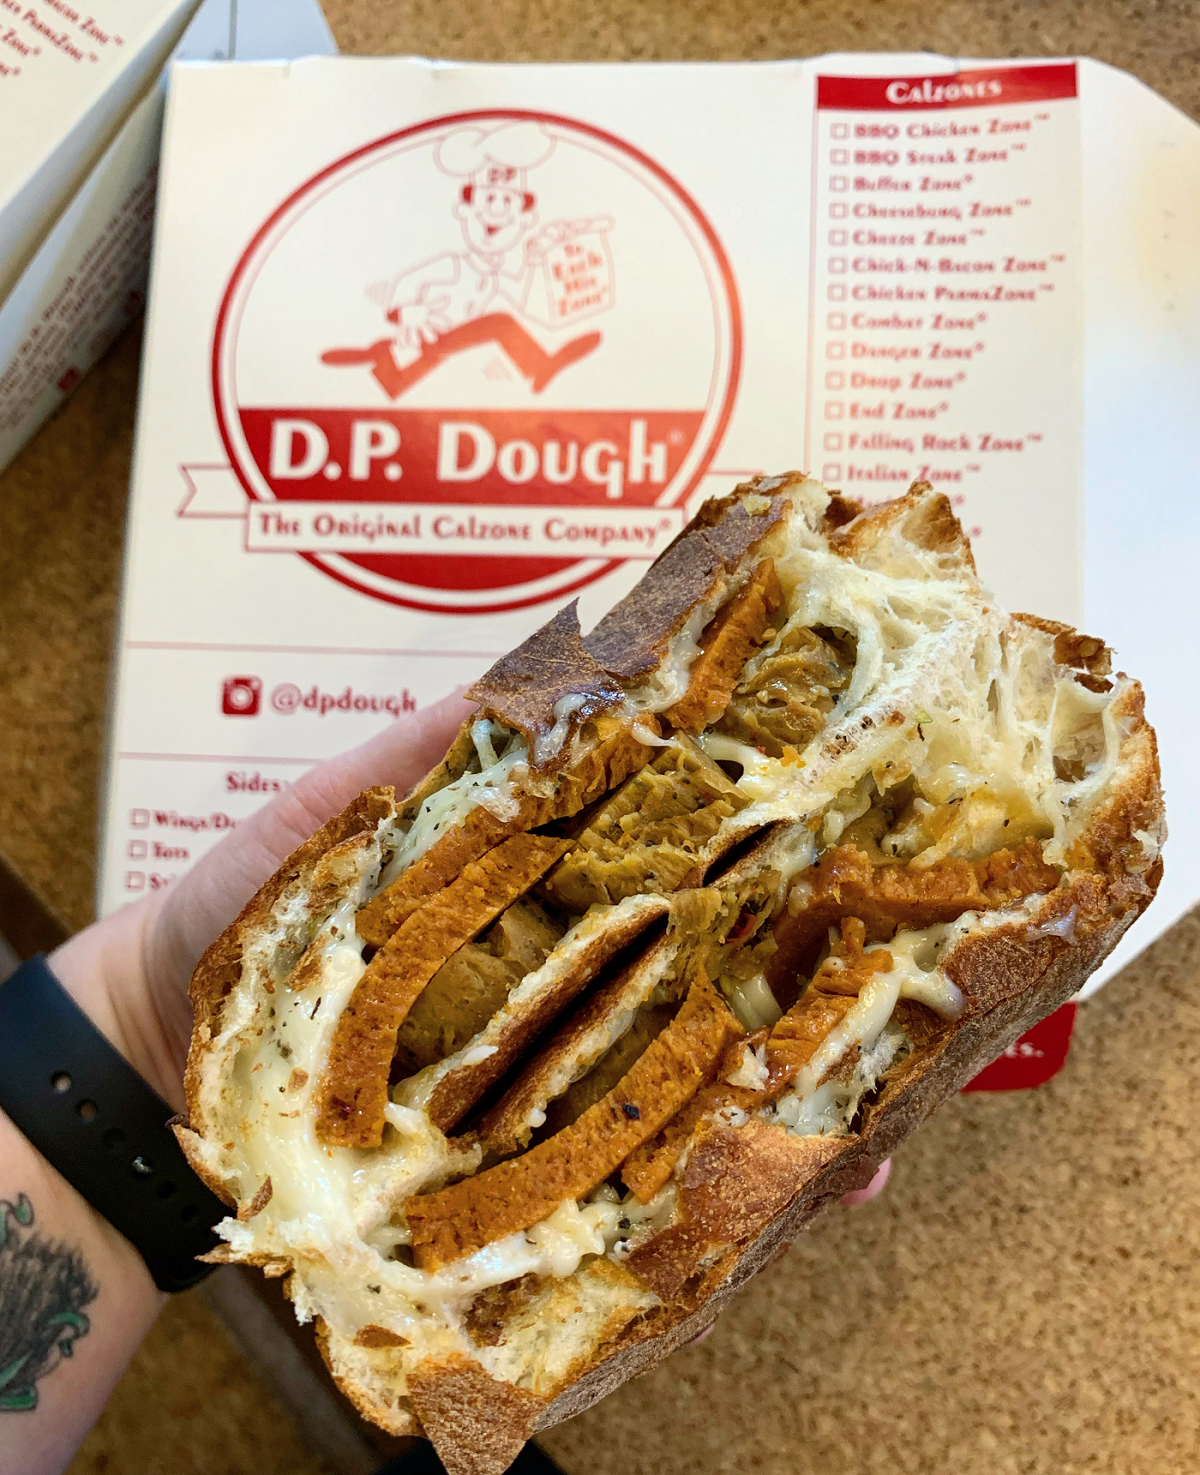 vegan calzone with plant based meat and dairy free cheese from D P Dough